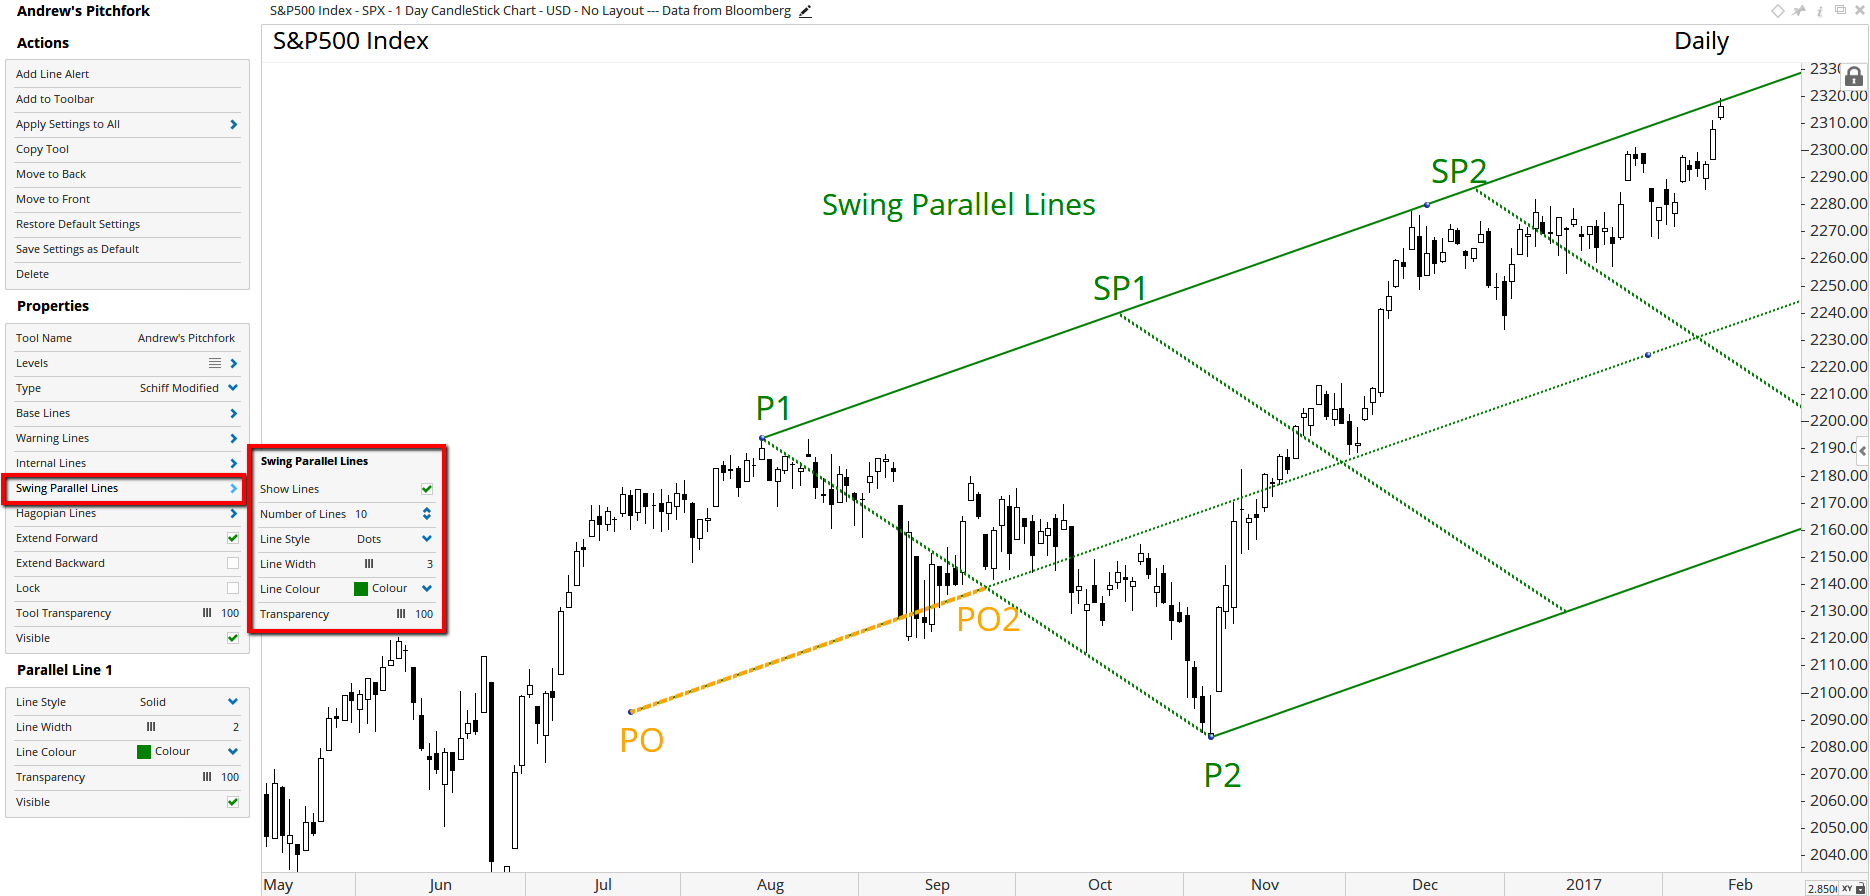 Swing Parallel Lines